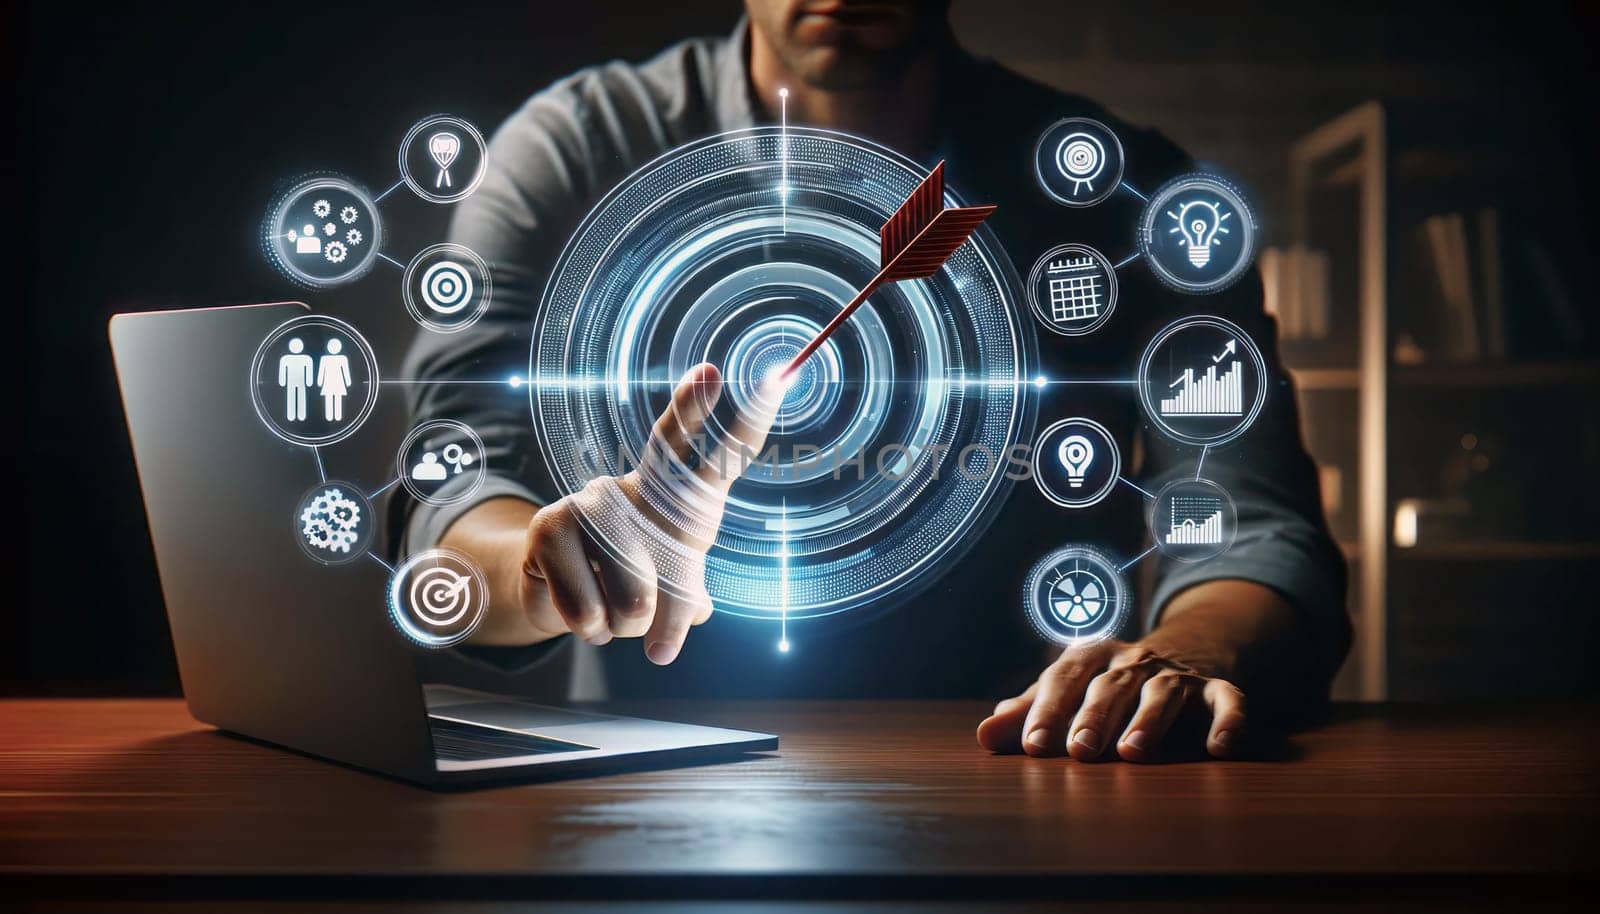 A digital marketing concept image. A person is in a dimly lit office environment, interacting with a translucent, futuristic touchscreen floating above a laptop. The primary focus is a large target icon with a red arrow hitting the bullseye, symbolizing goal achievement. Surrounding this main icon are smaller, neatly arranged icons representing team collaboration, analytics, partnership handshake, calendar scheduling, growth chart, and a light bulb for ideas. The icons glow in white and blue against the dark background. The person's attire is casual, and their finger is touching the target icon, suggesting interactivity and achievement in a business context.